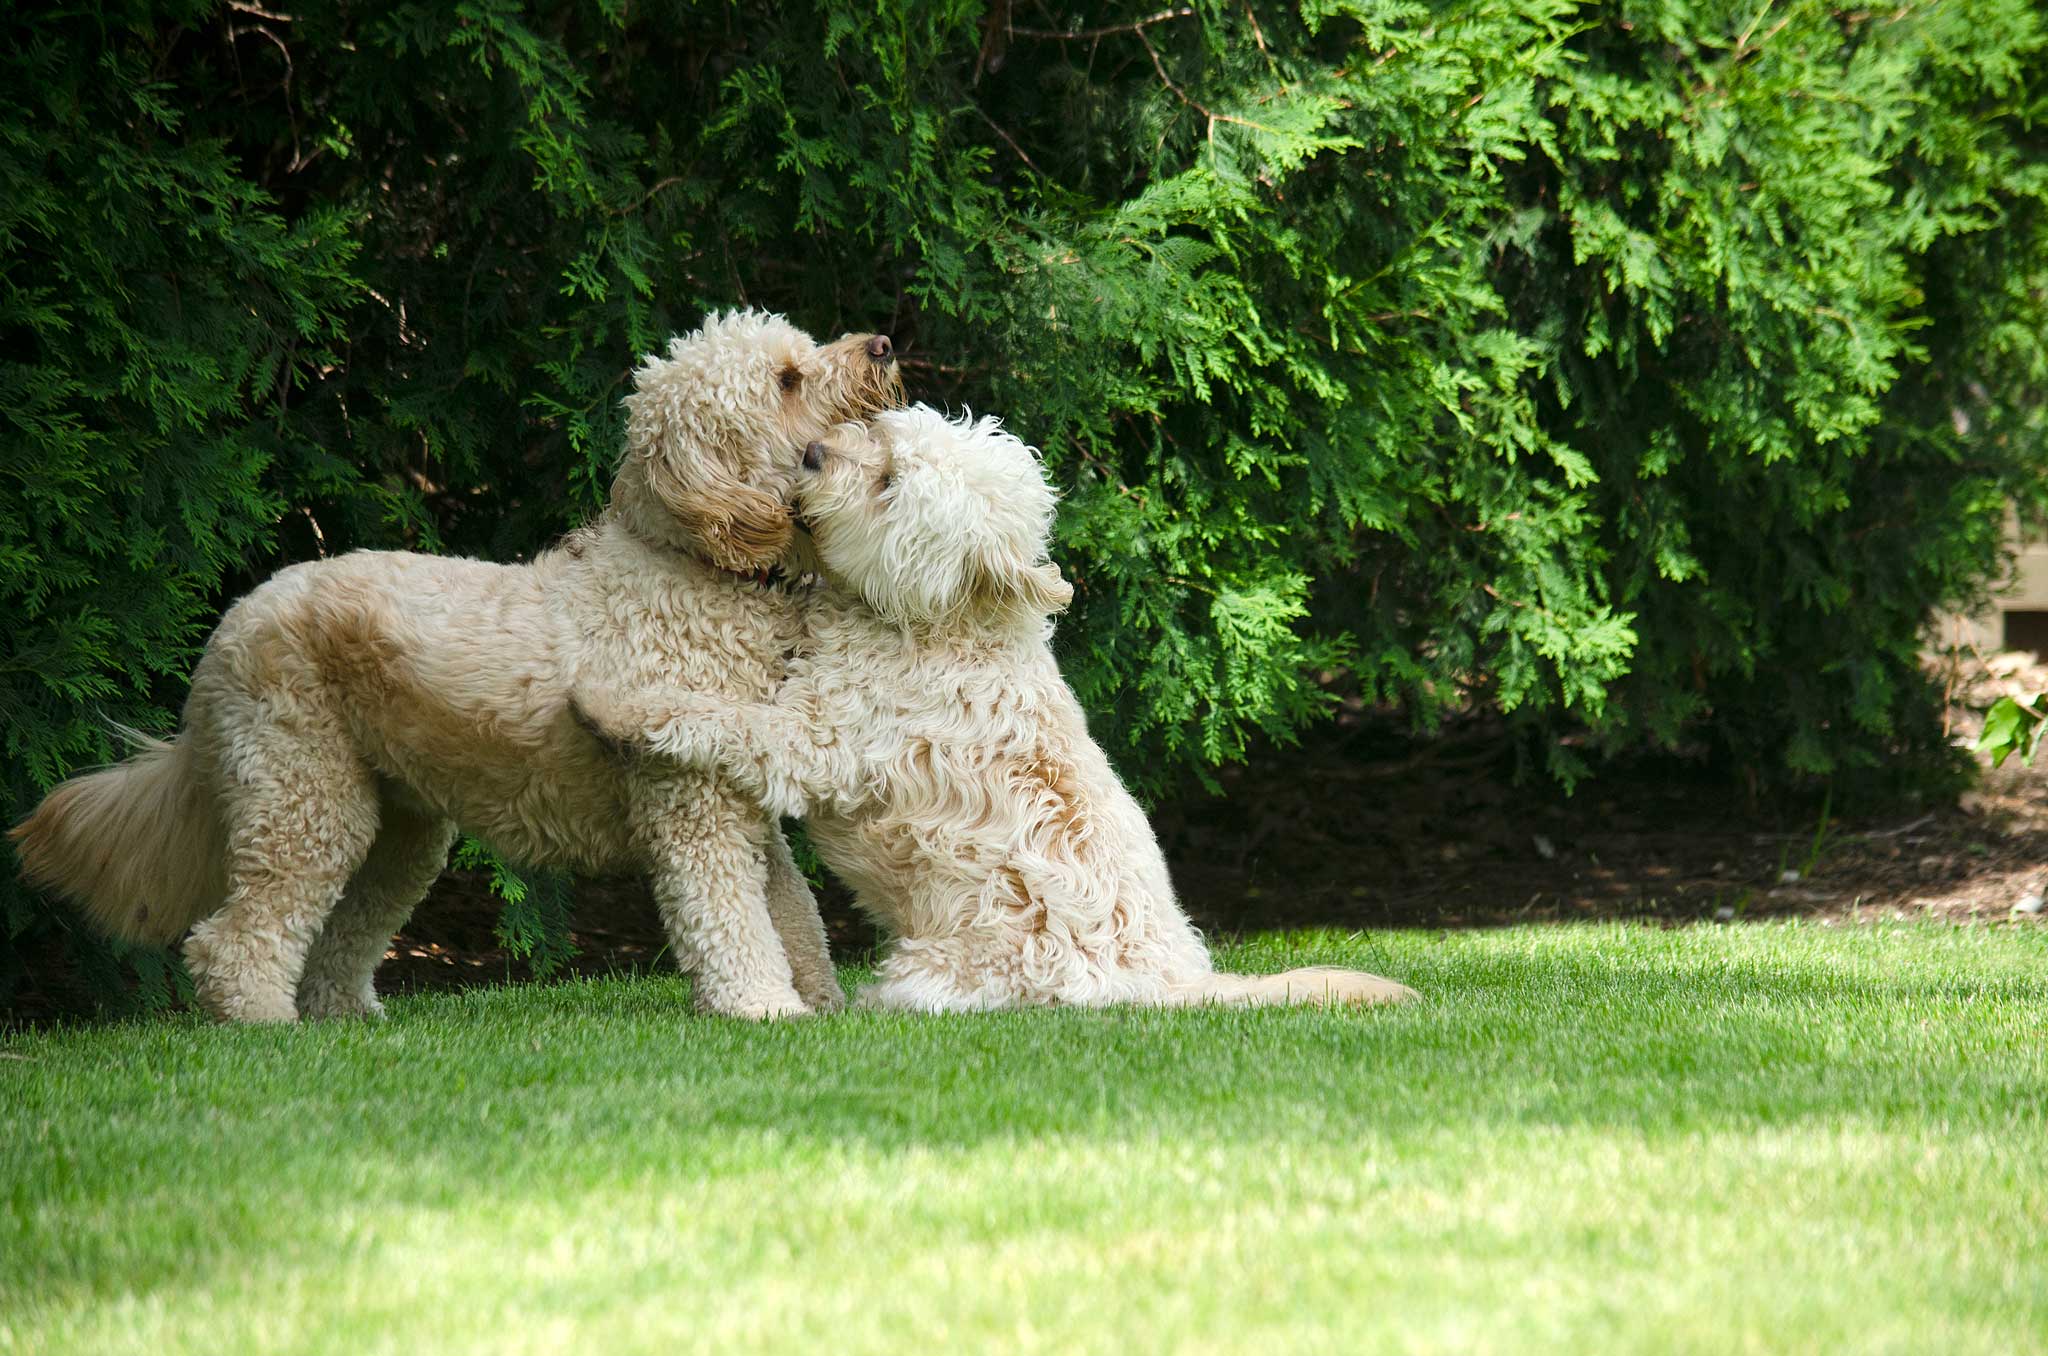 two adorable blond mini goldendoodles hugging each in grass near large green arborvitae trees